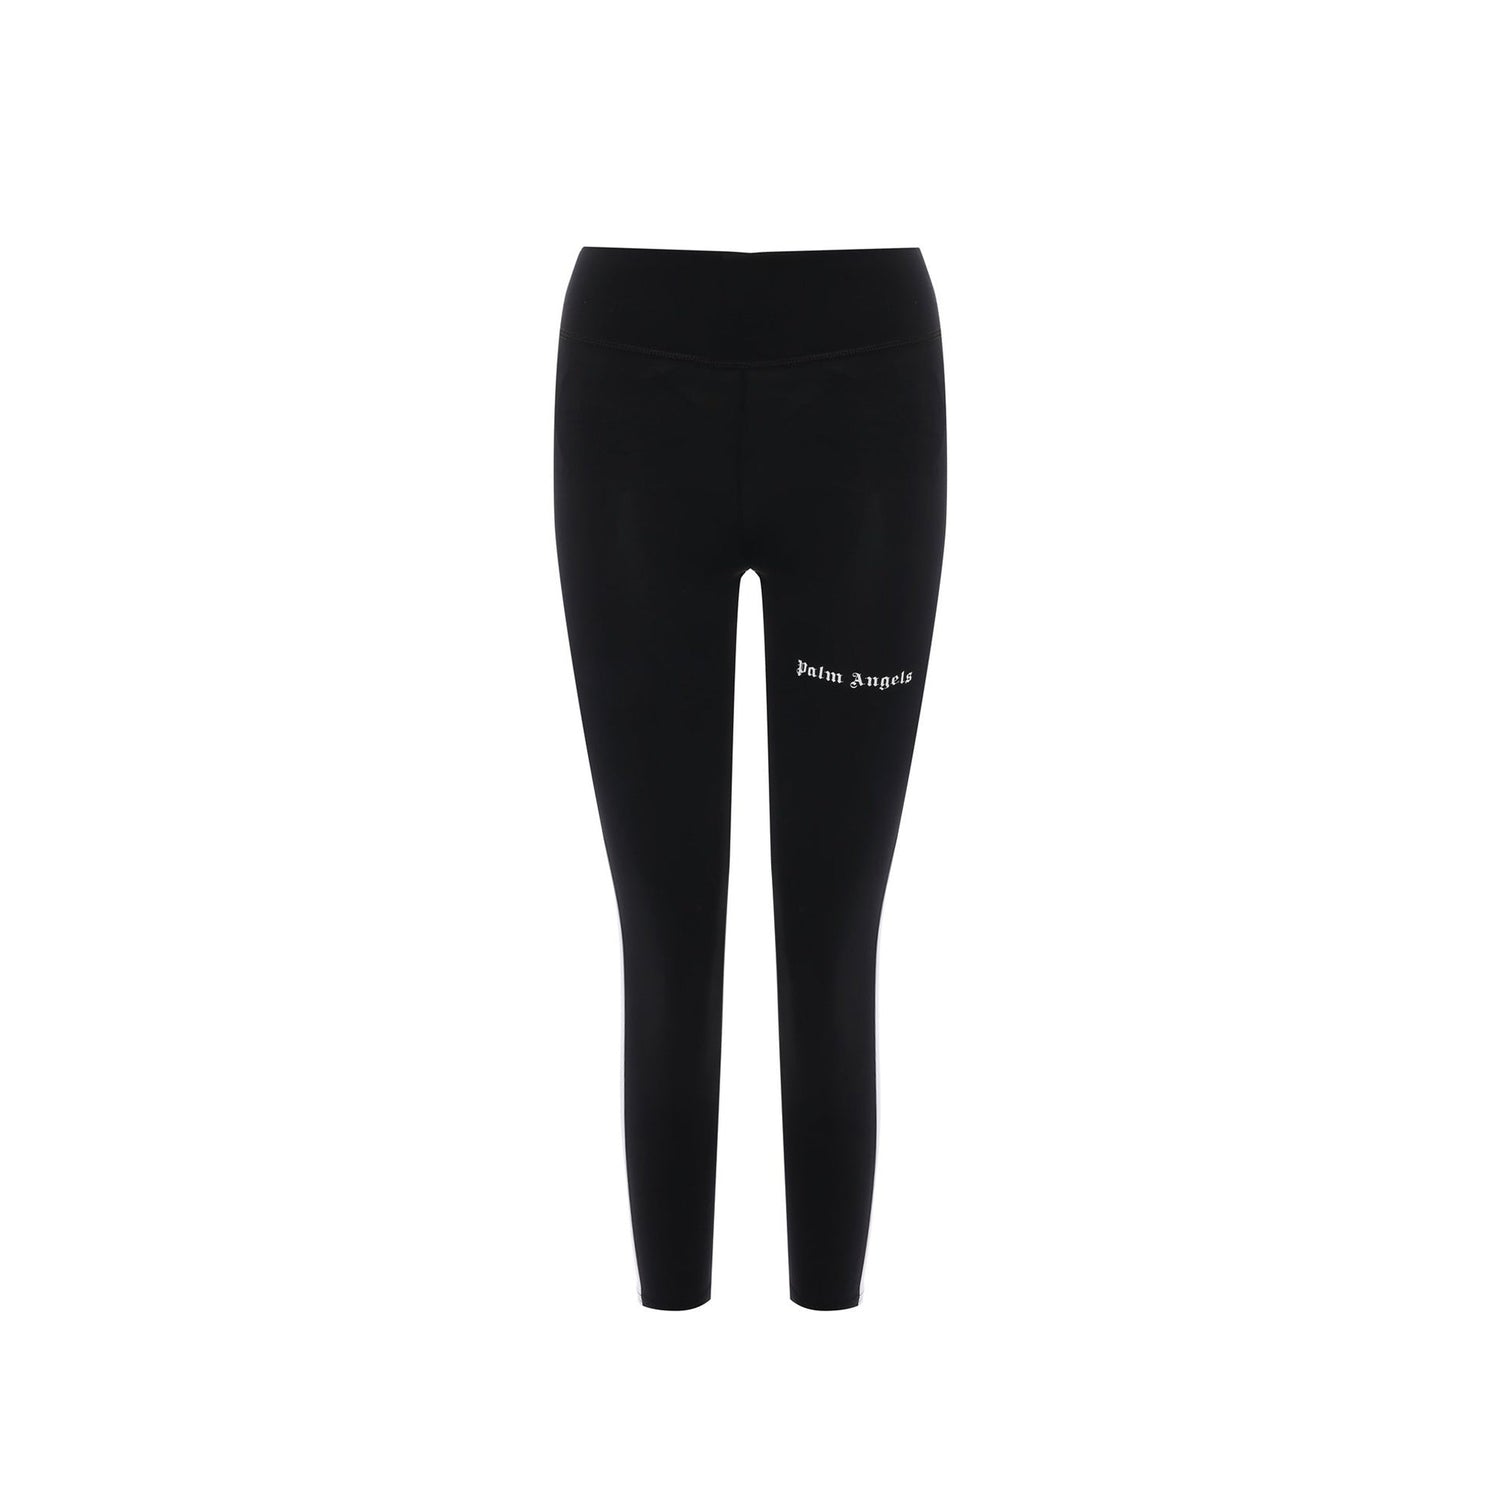 Only Play Justyna life jersey leggings in black with white logo